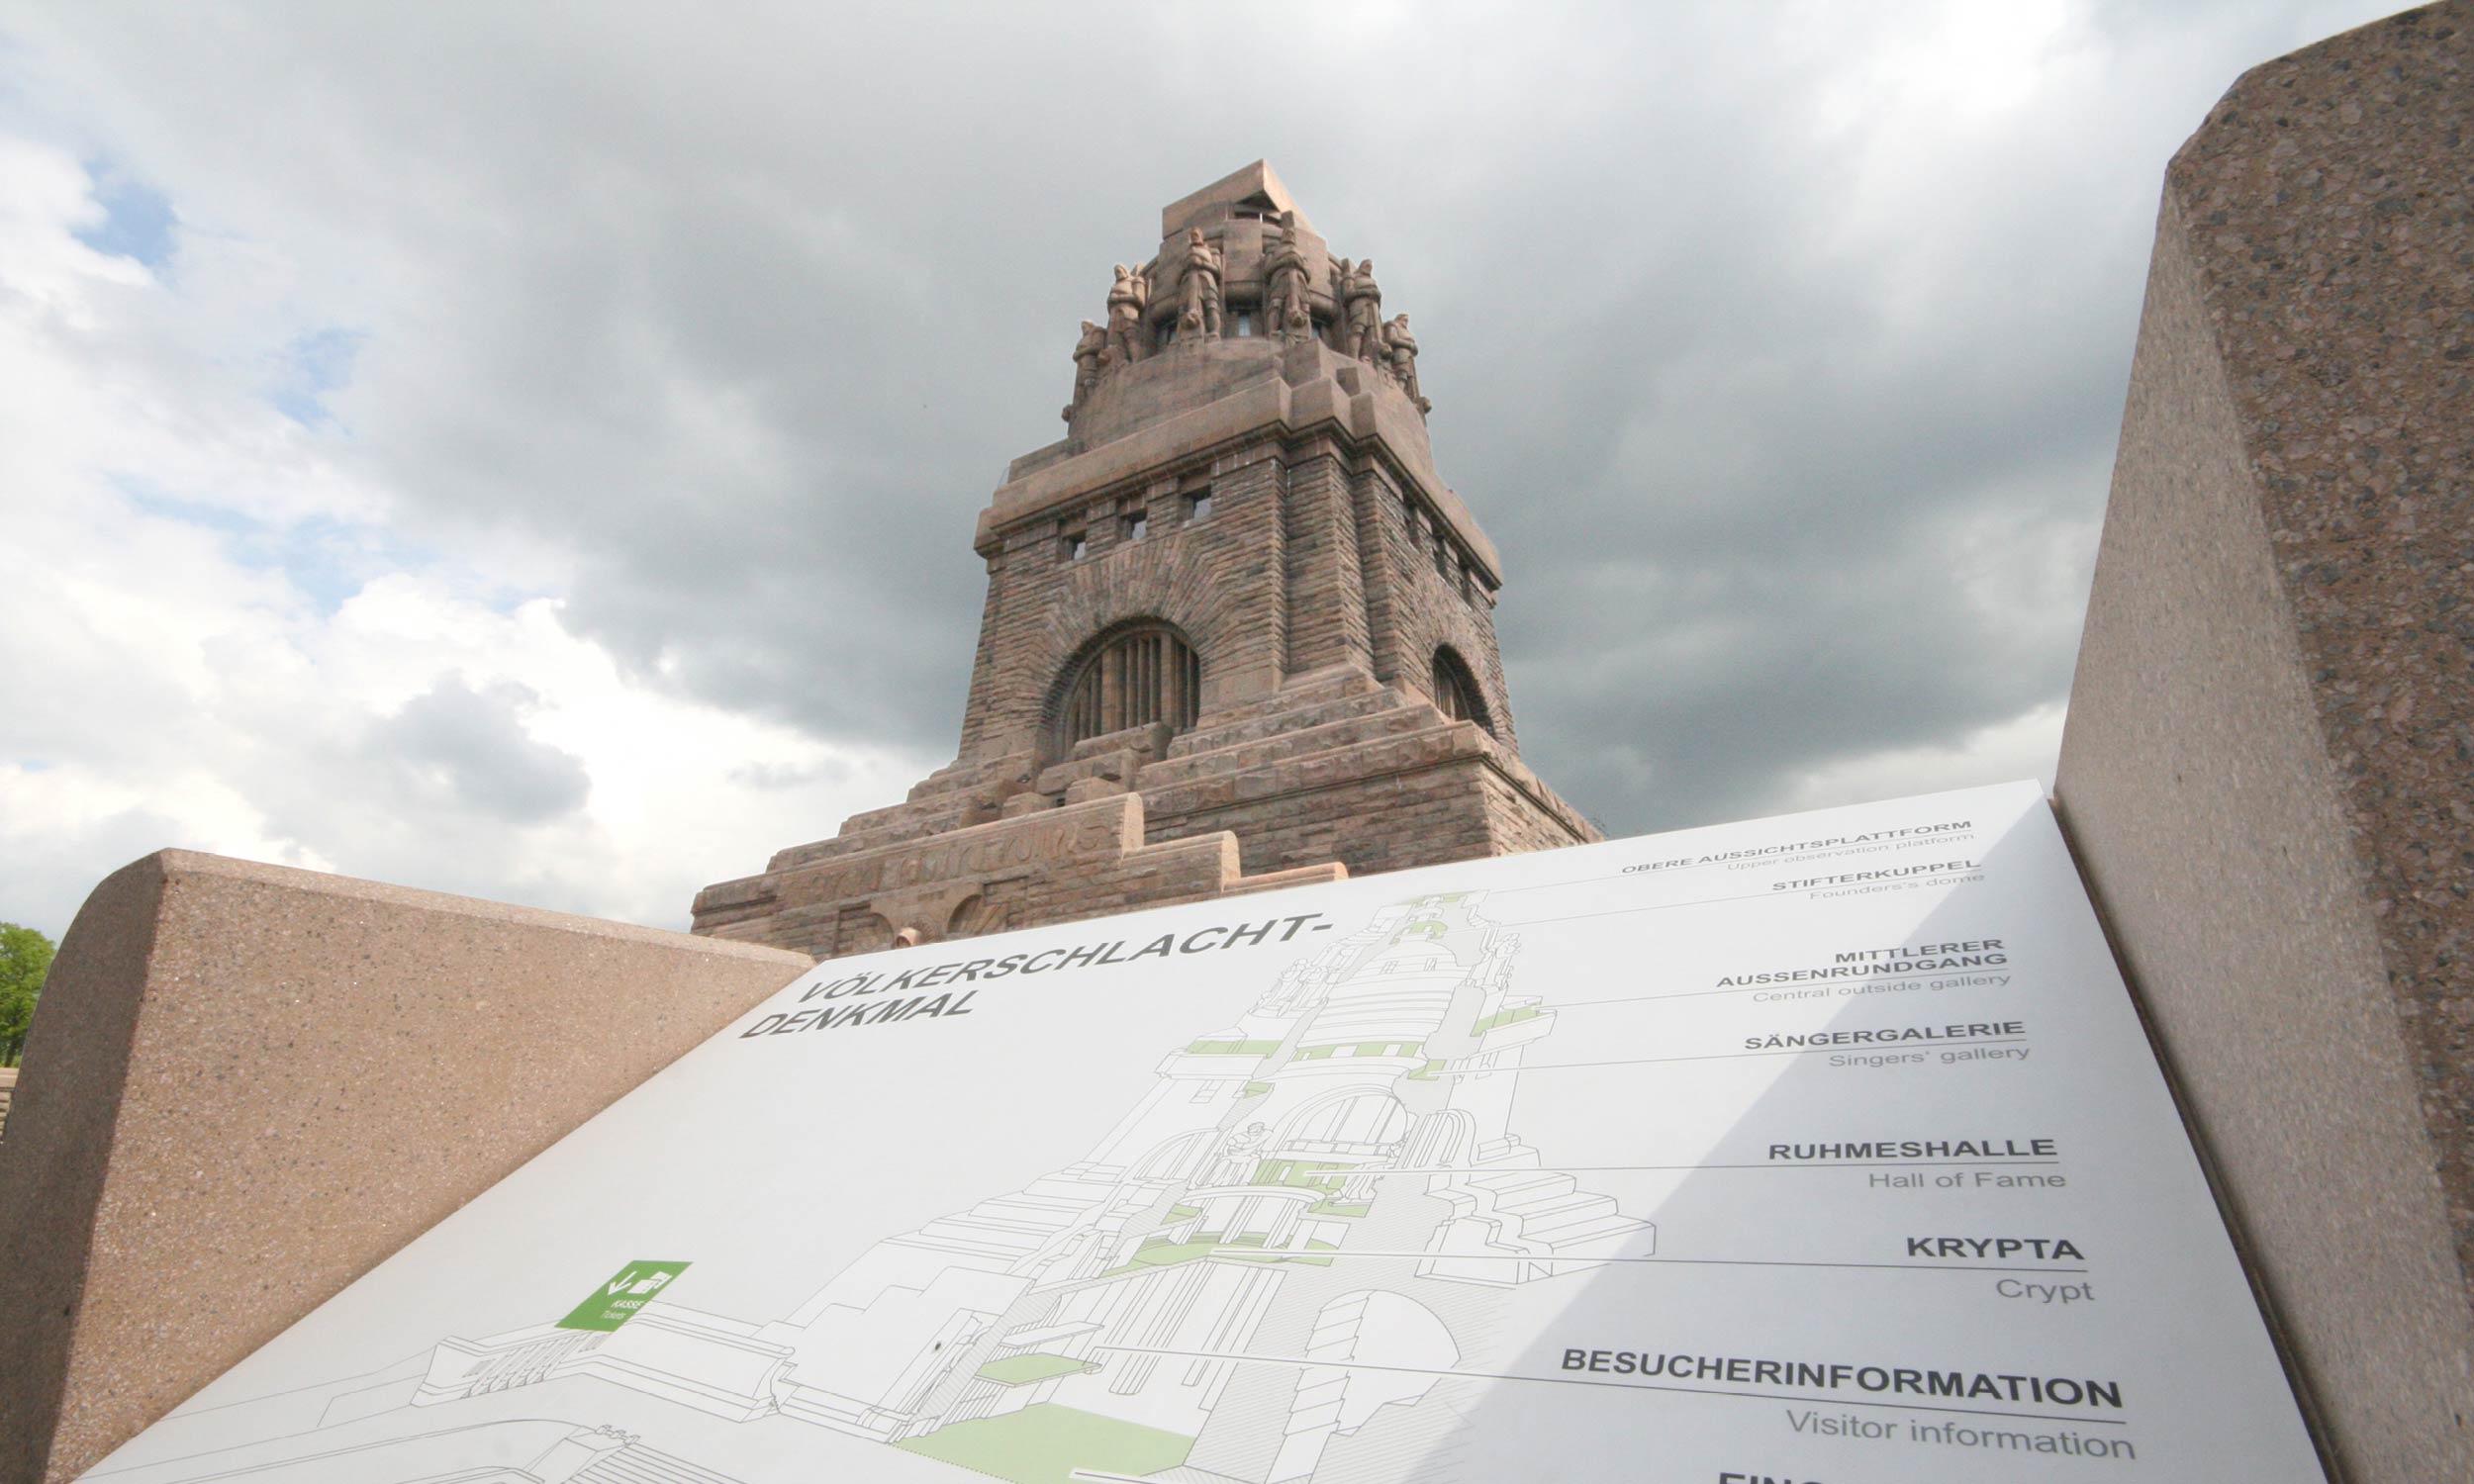 Focus on an information board showing the monument in cross-section. In the background, the imposing monument can be seen stretching into the cloudy sky.